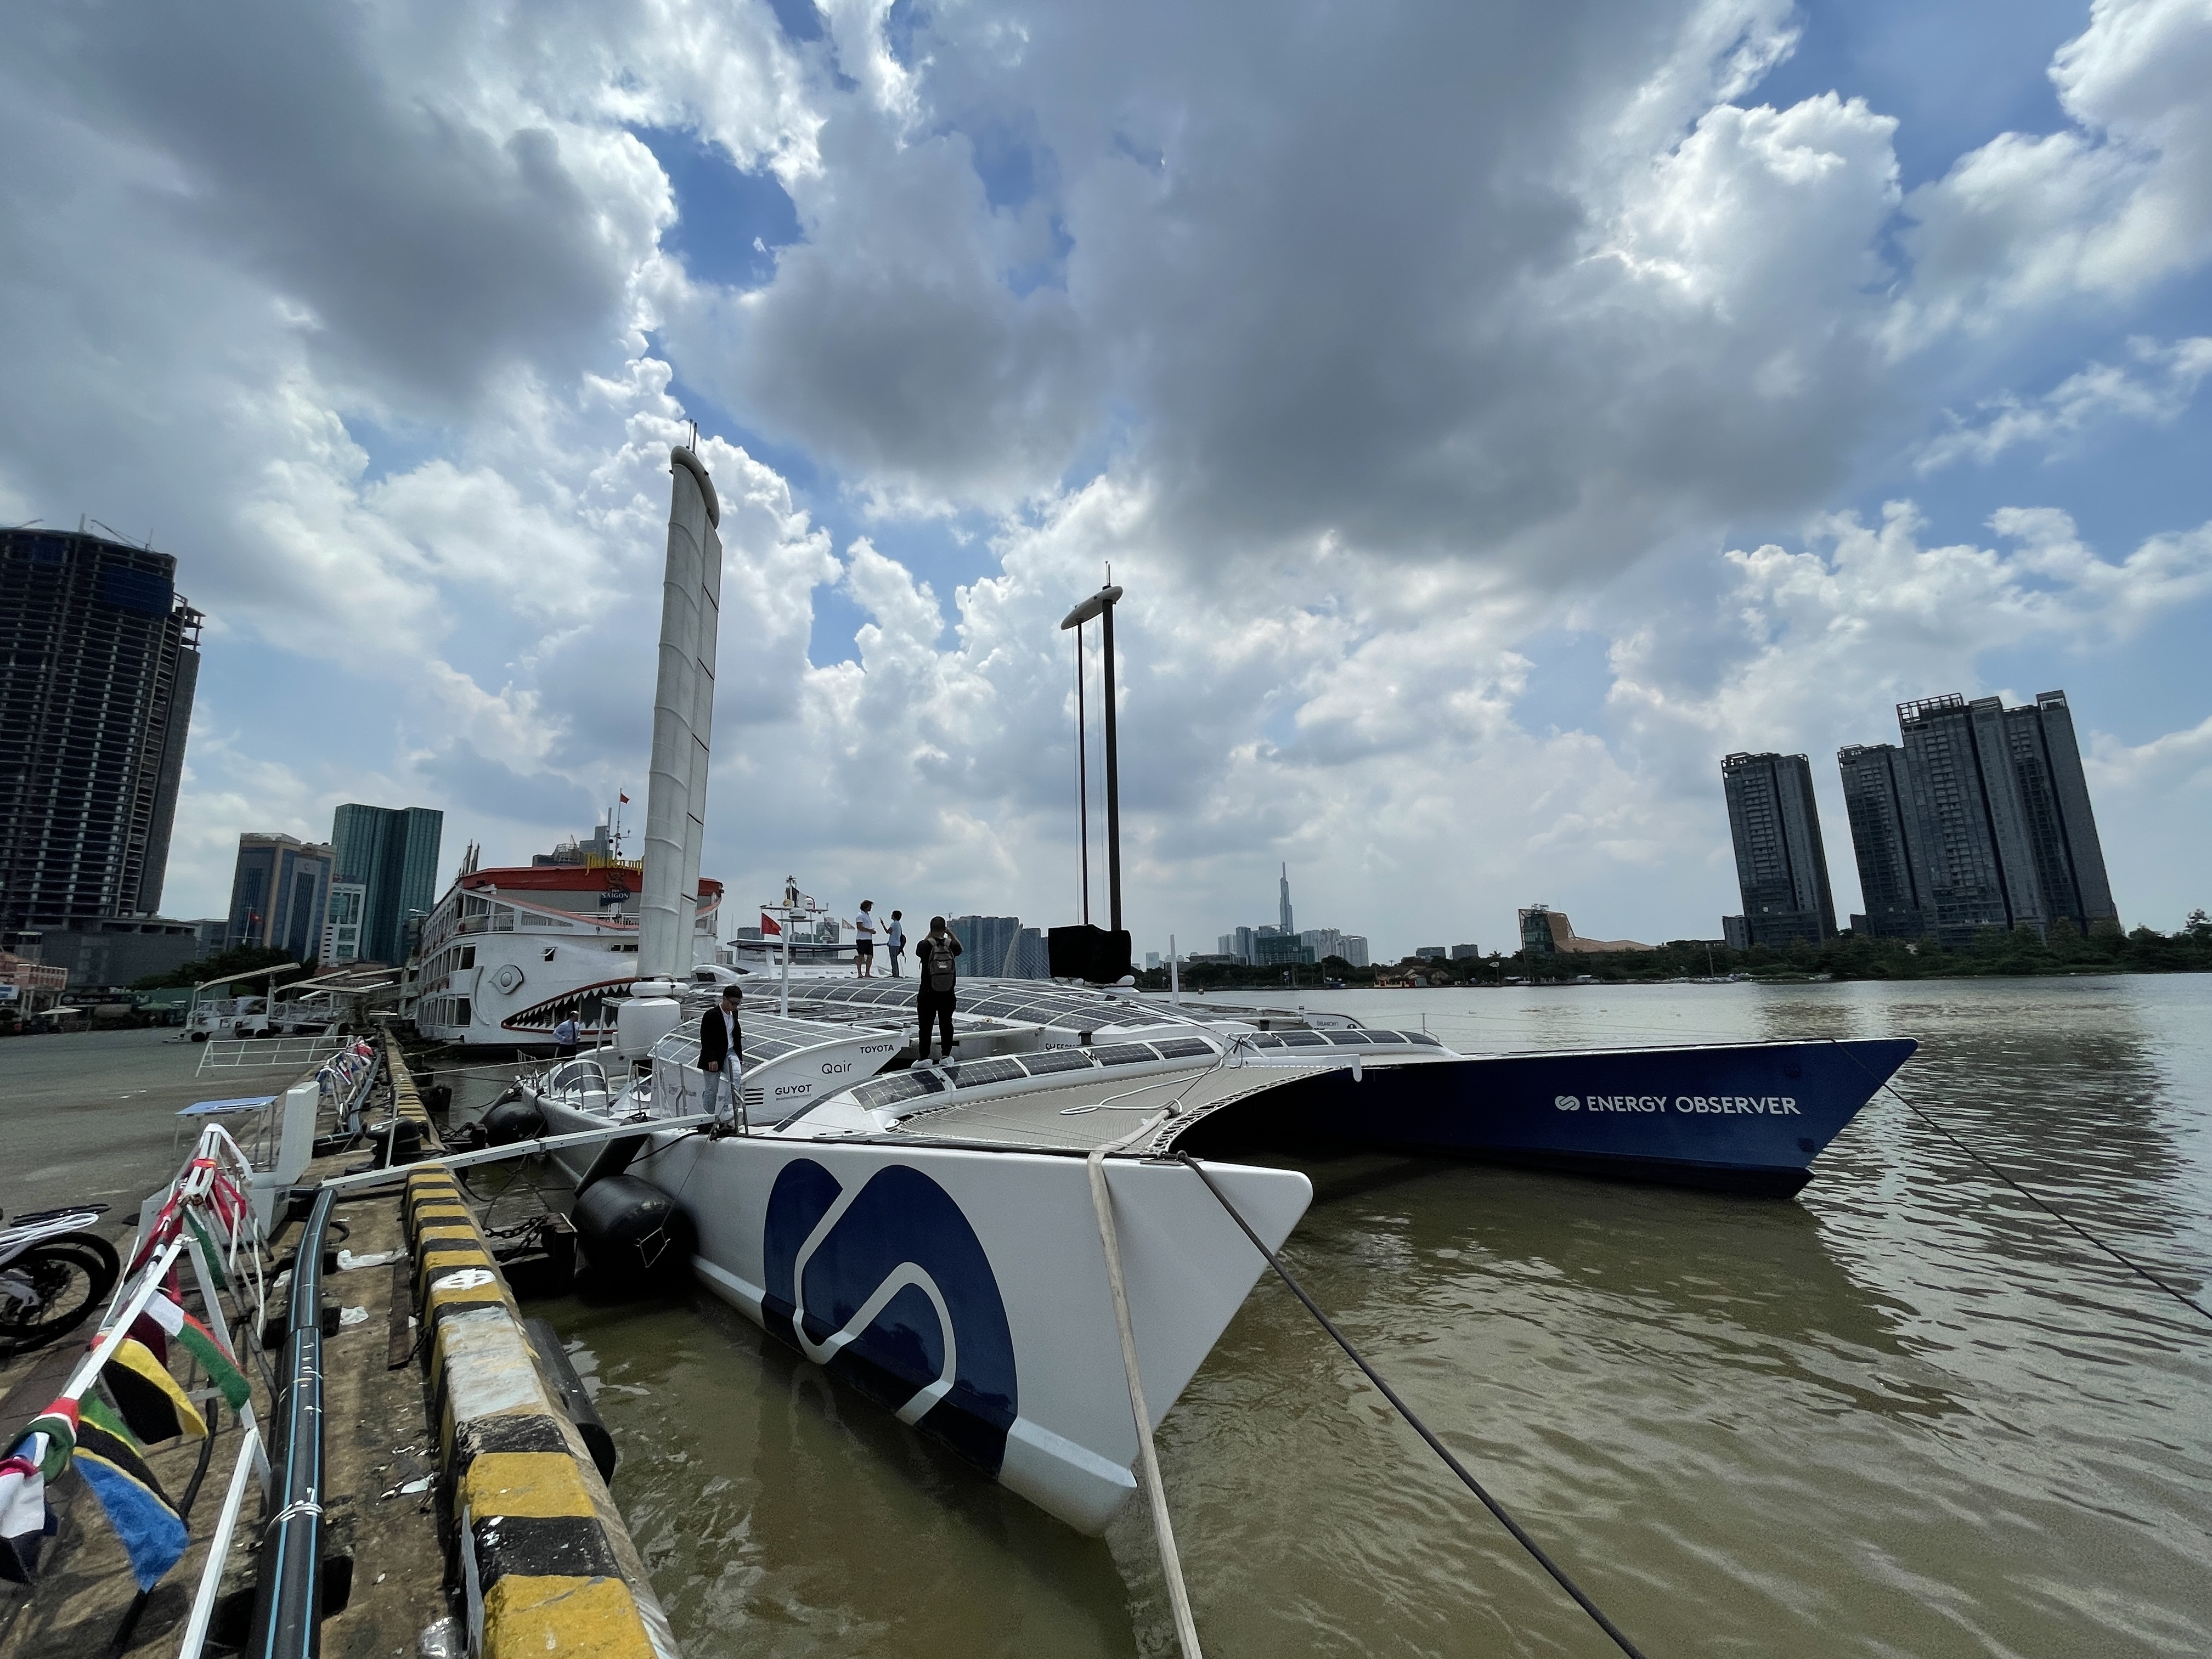 France's zero-emission vessel makes stop in Ho Chi Minh City during worldwide voyage